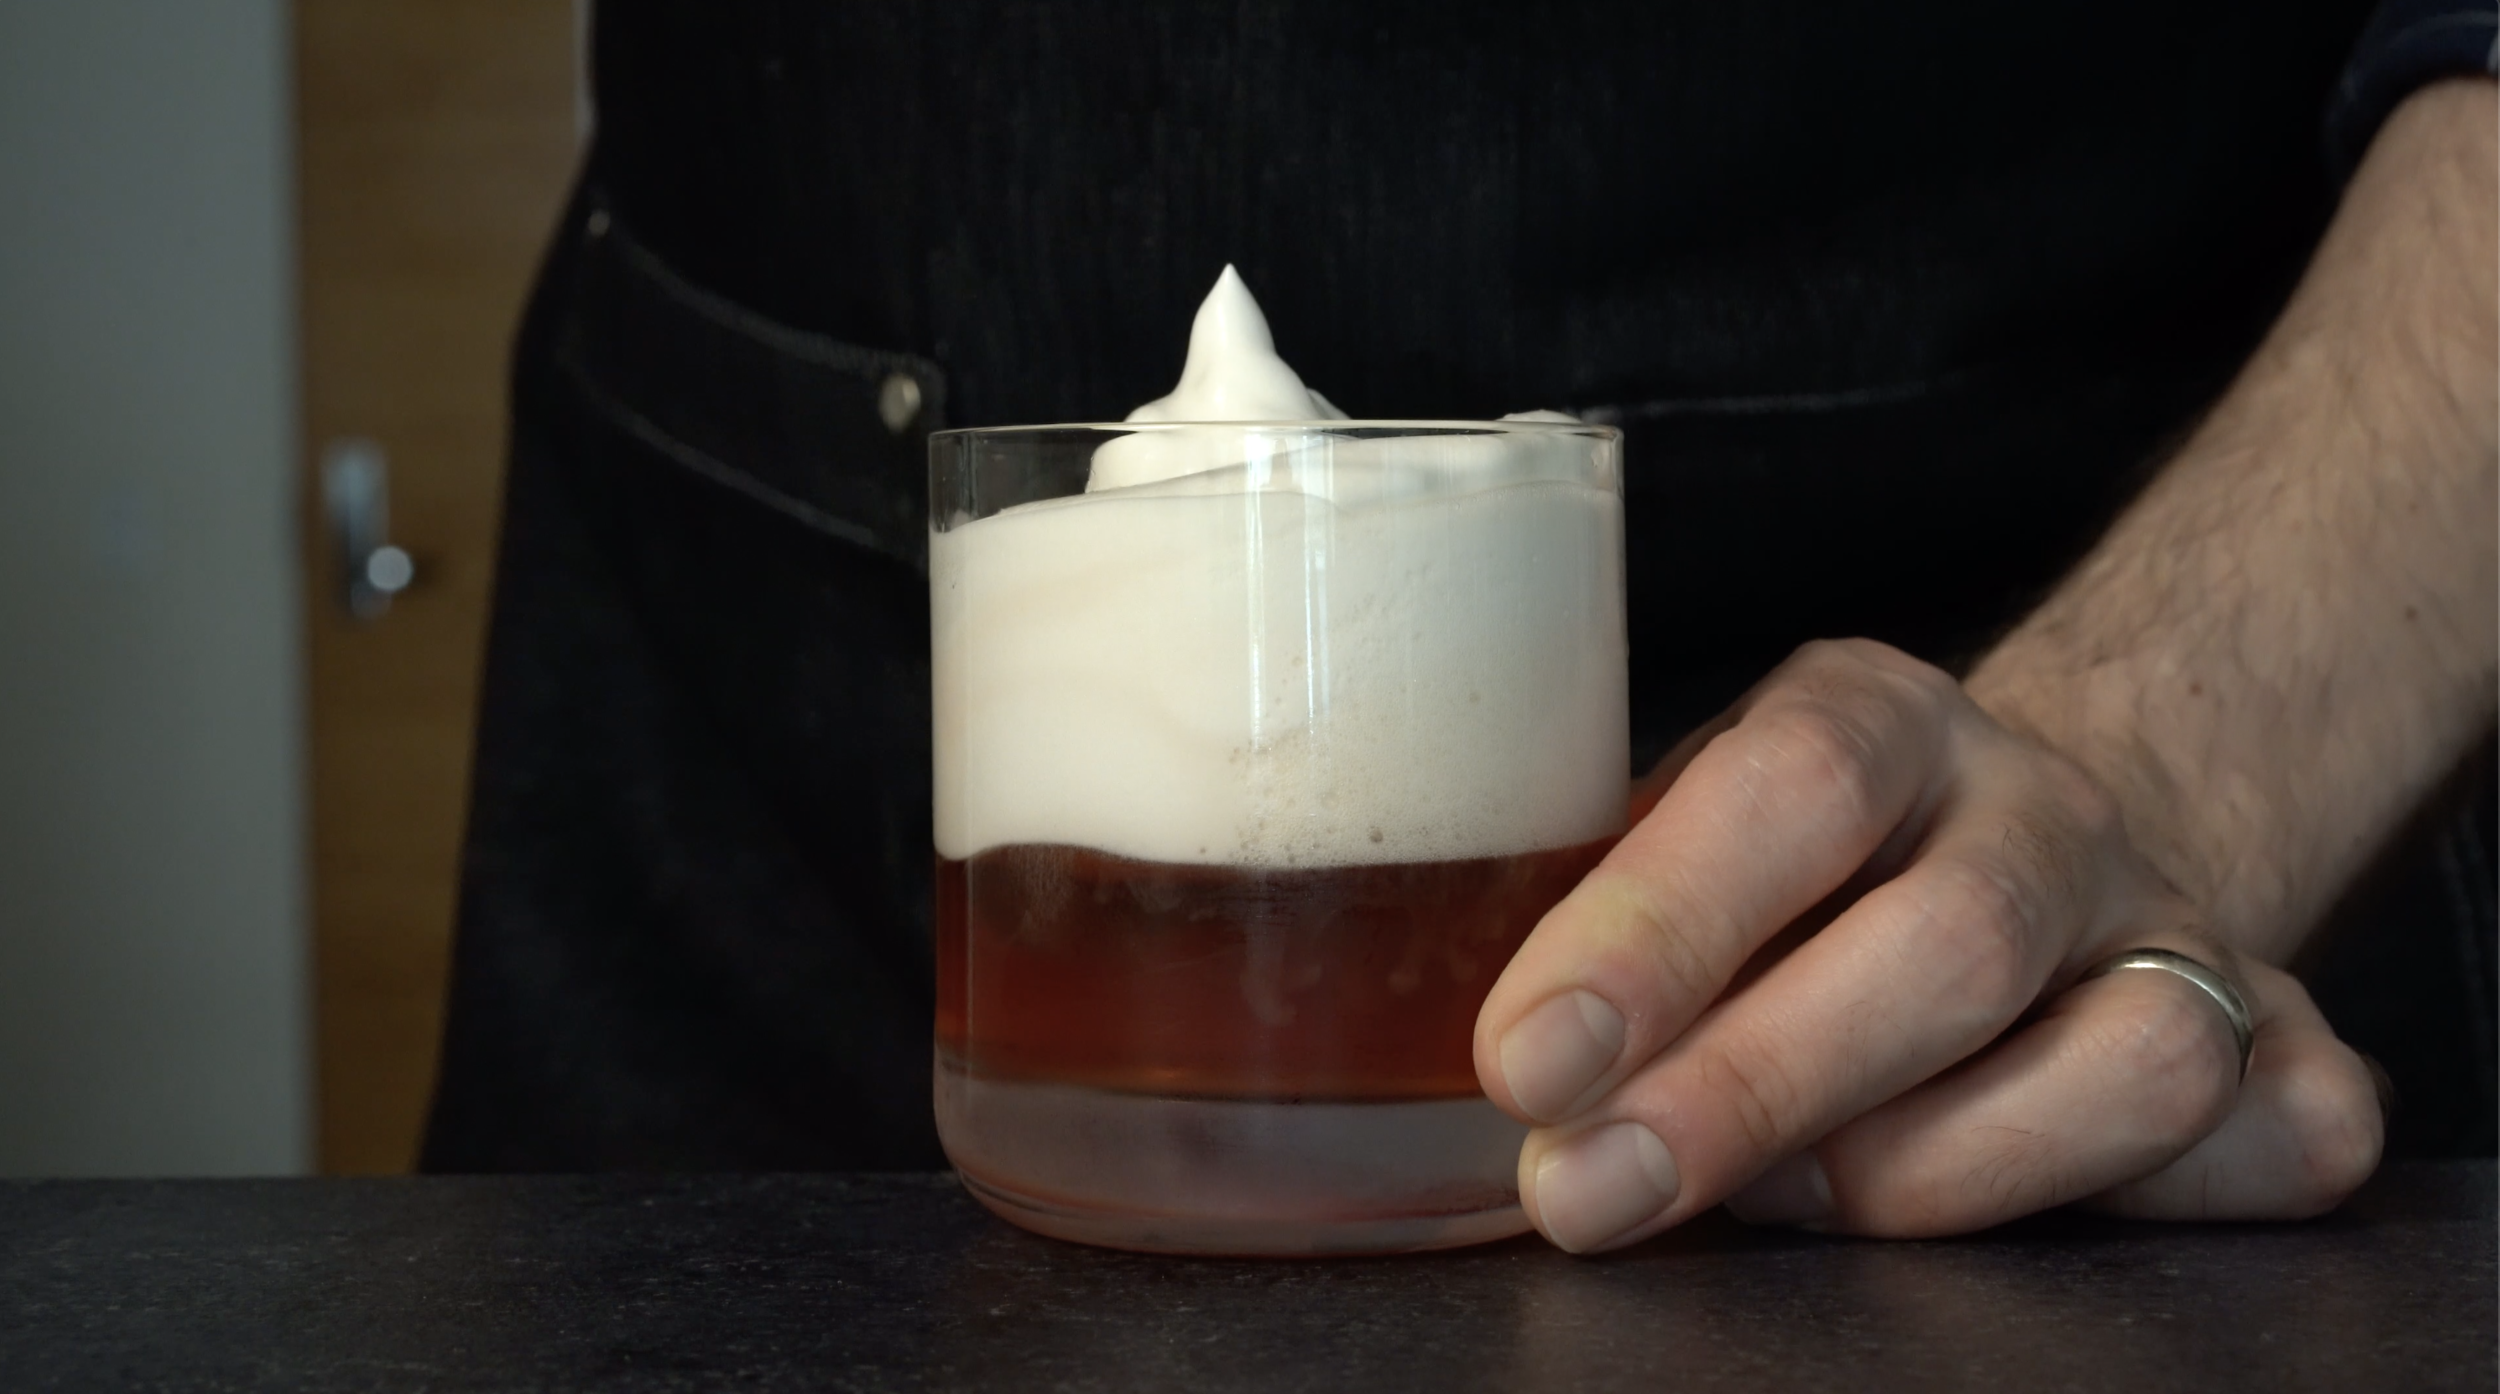 How to make FOAM for a Cocktail without Egg White 